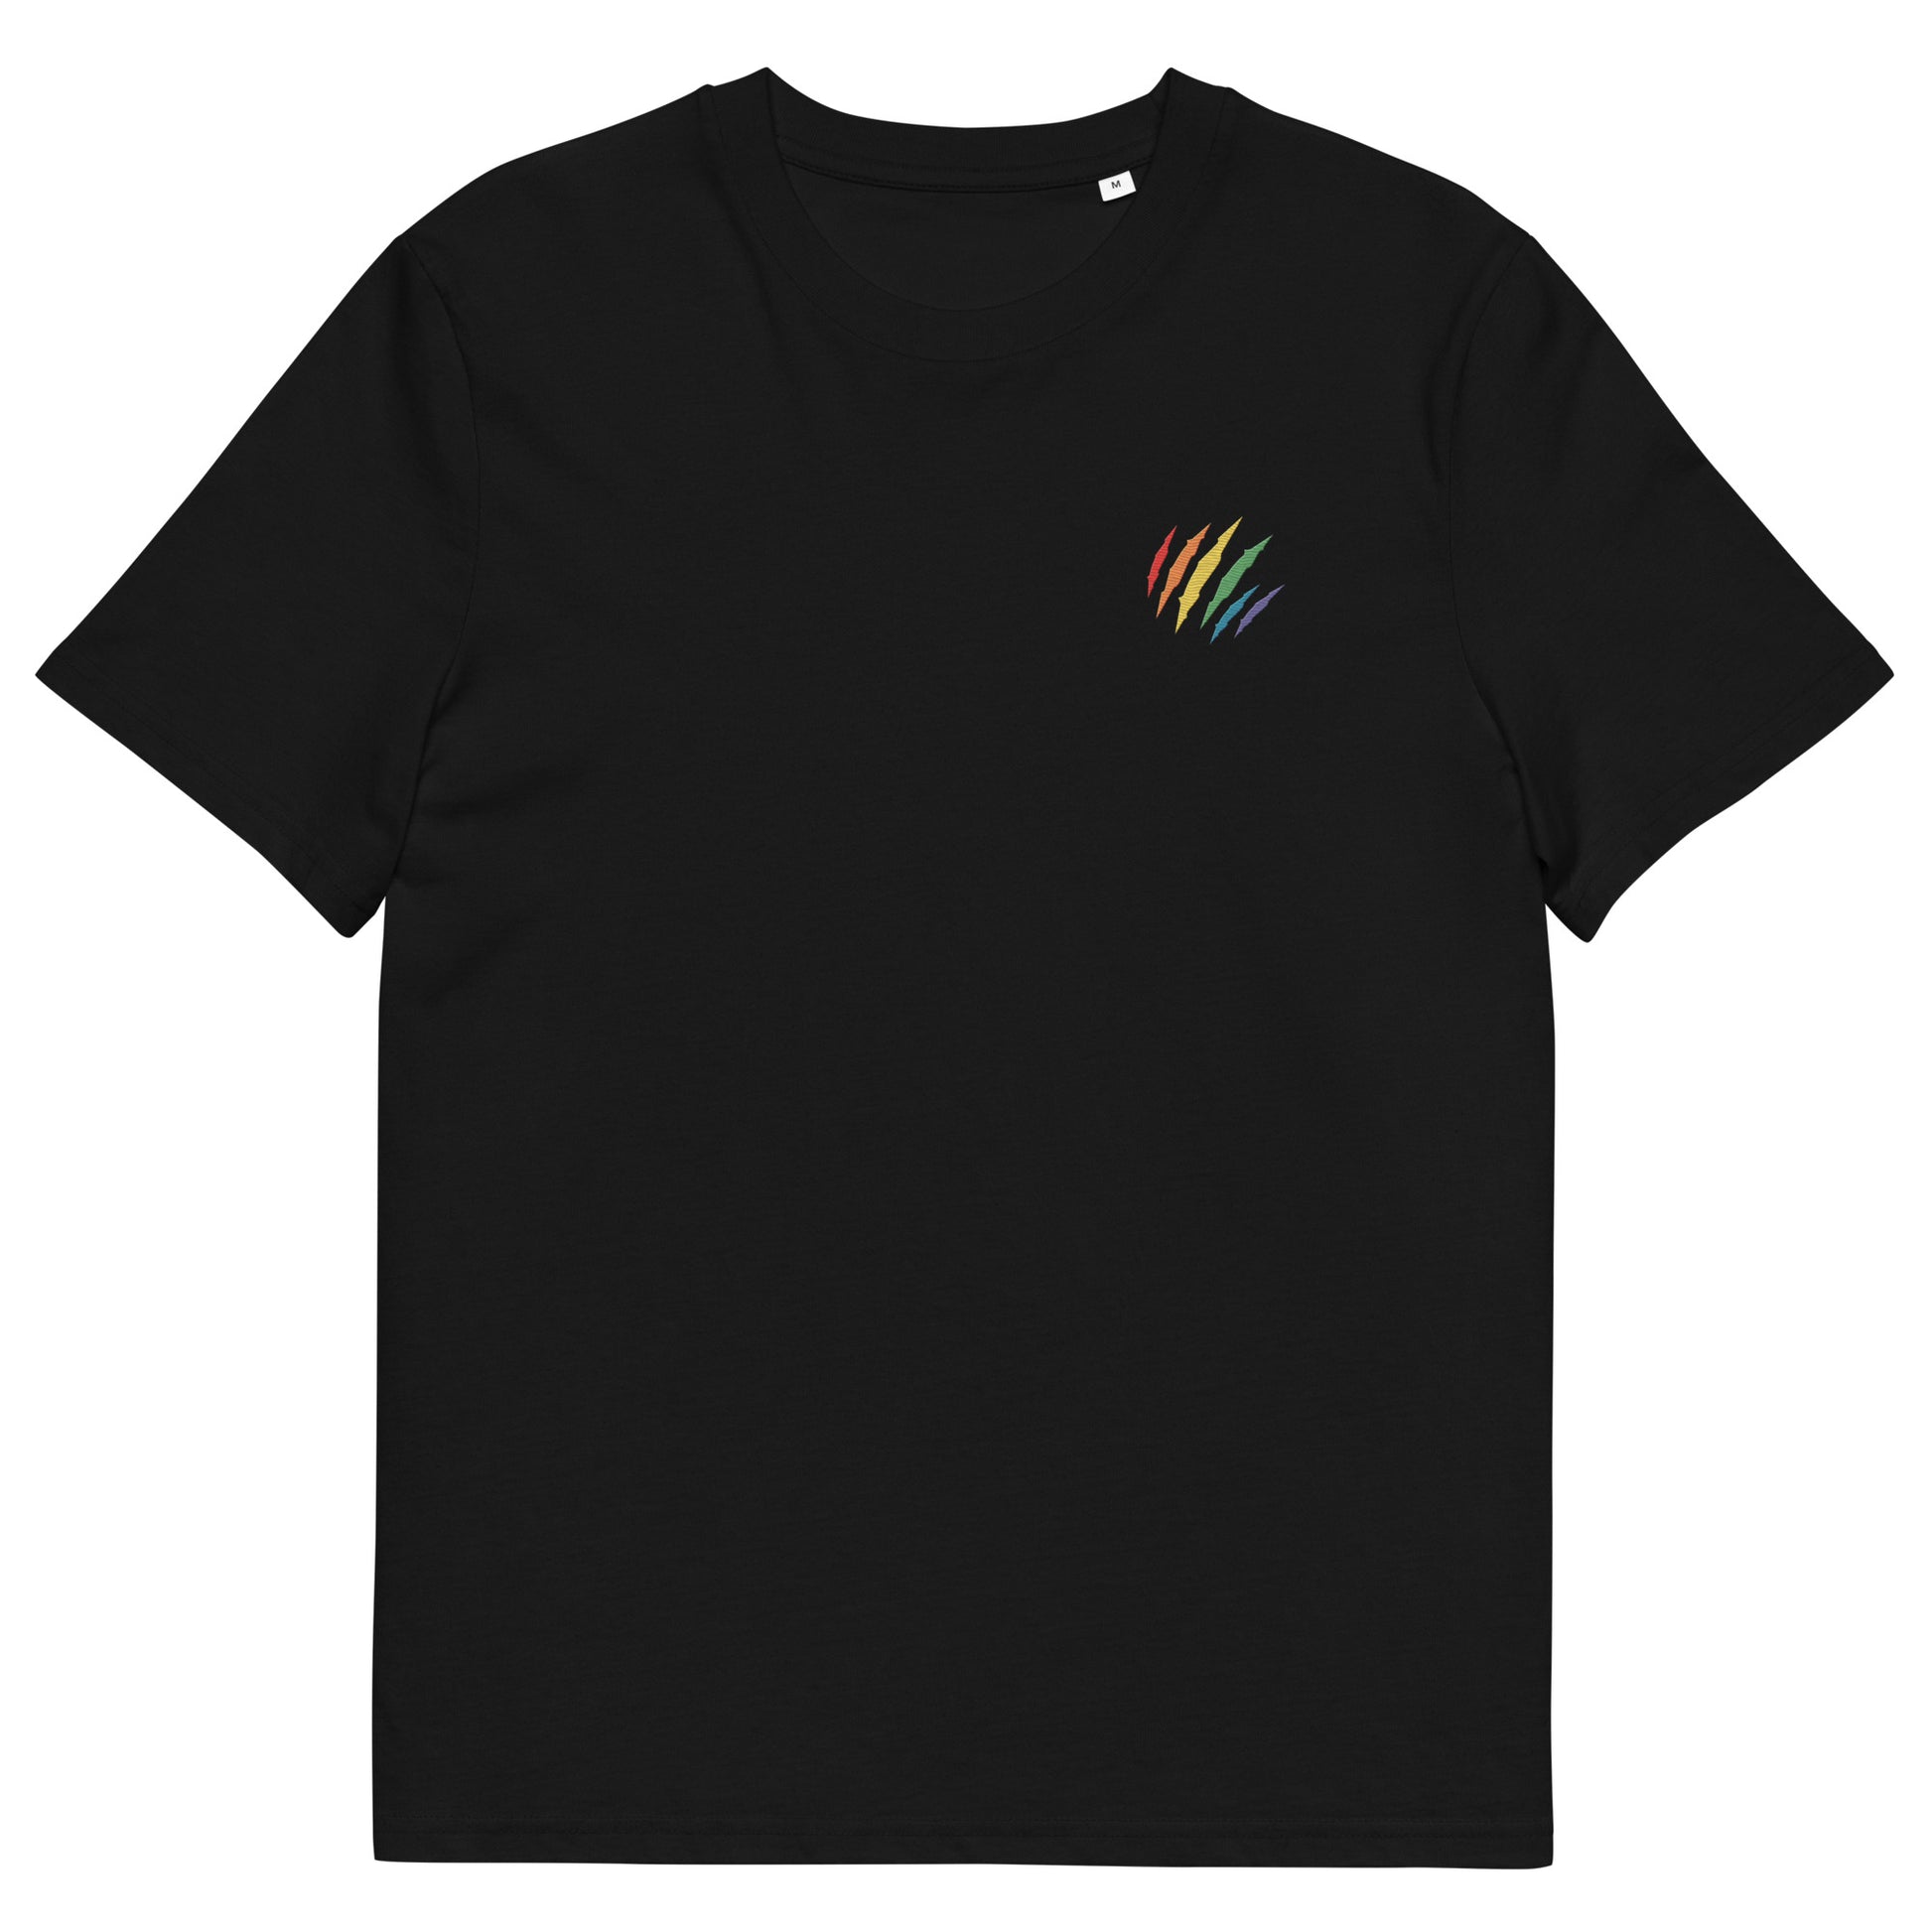 Fitted black organic cotton t-shirt with an embroidered scratch in the rainbow colors on the left chest. Available in sizes S to 3XL.